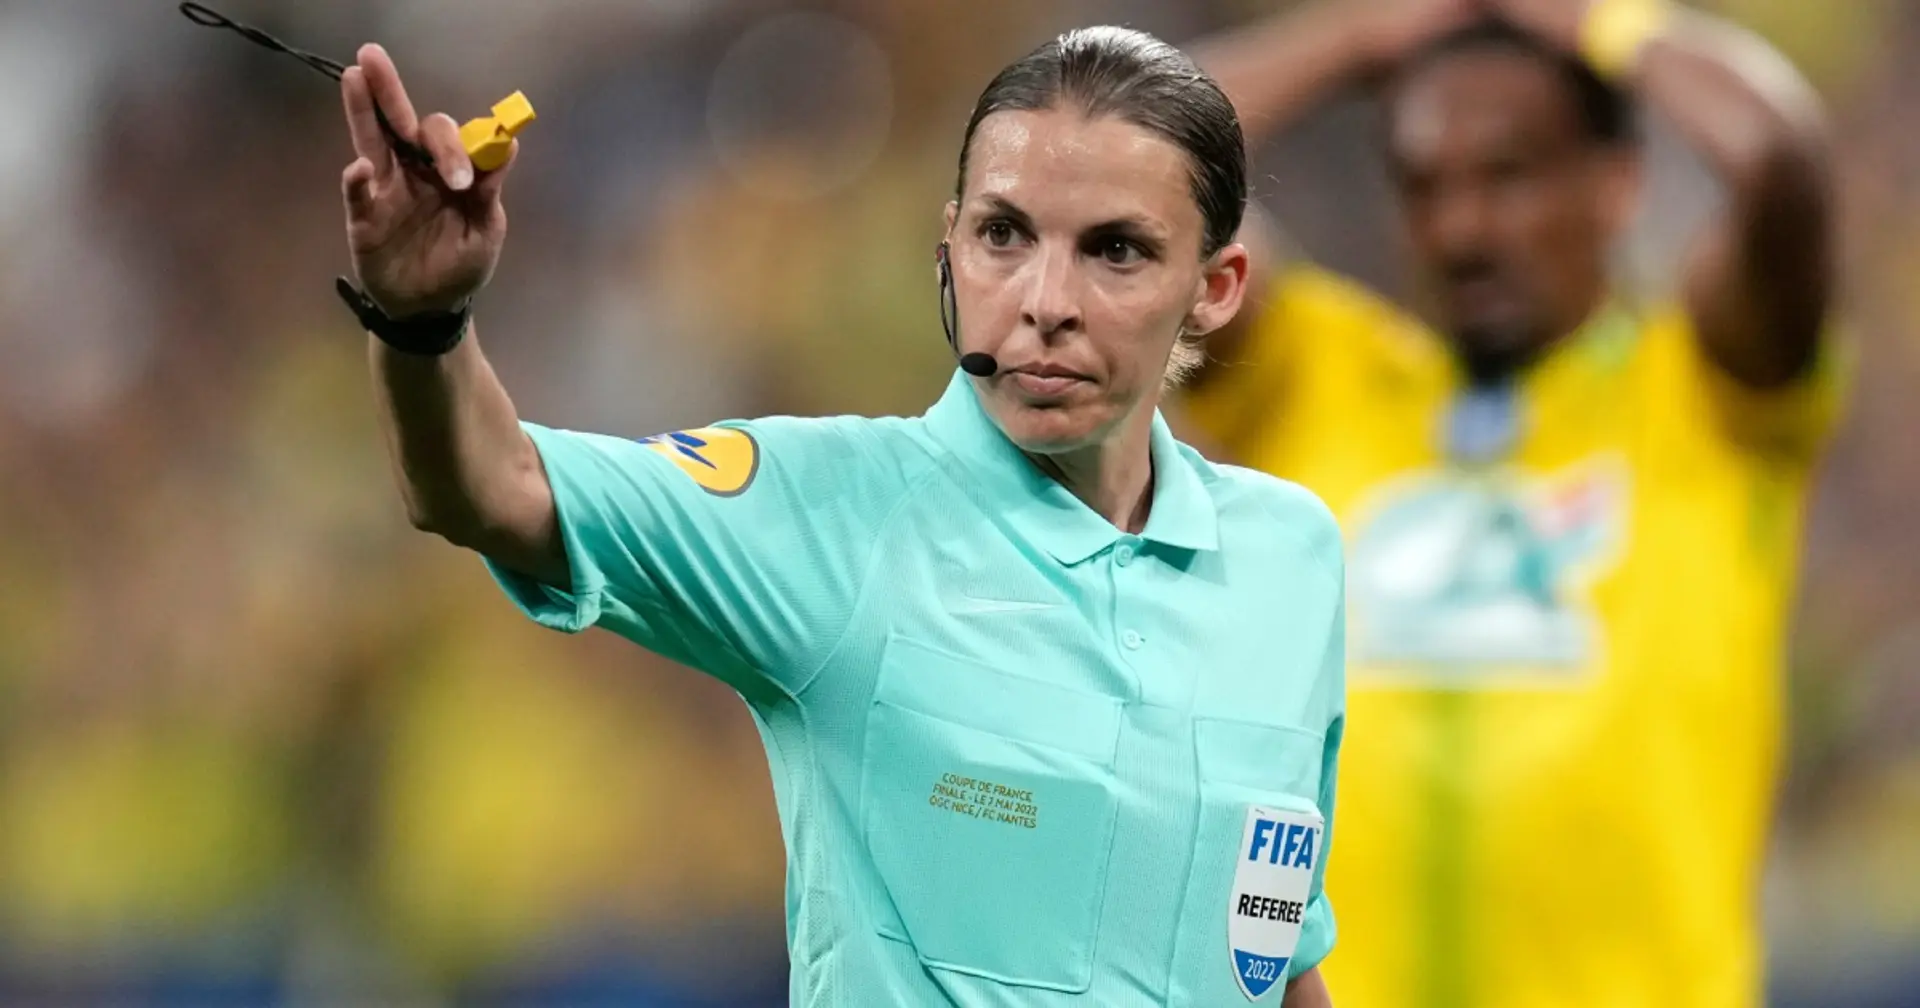 Female referees to officiate World Cup games for the first time ever